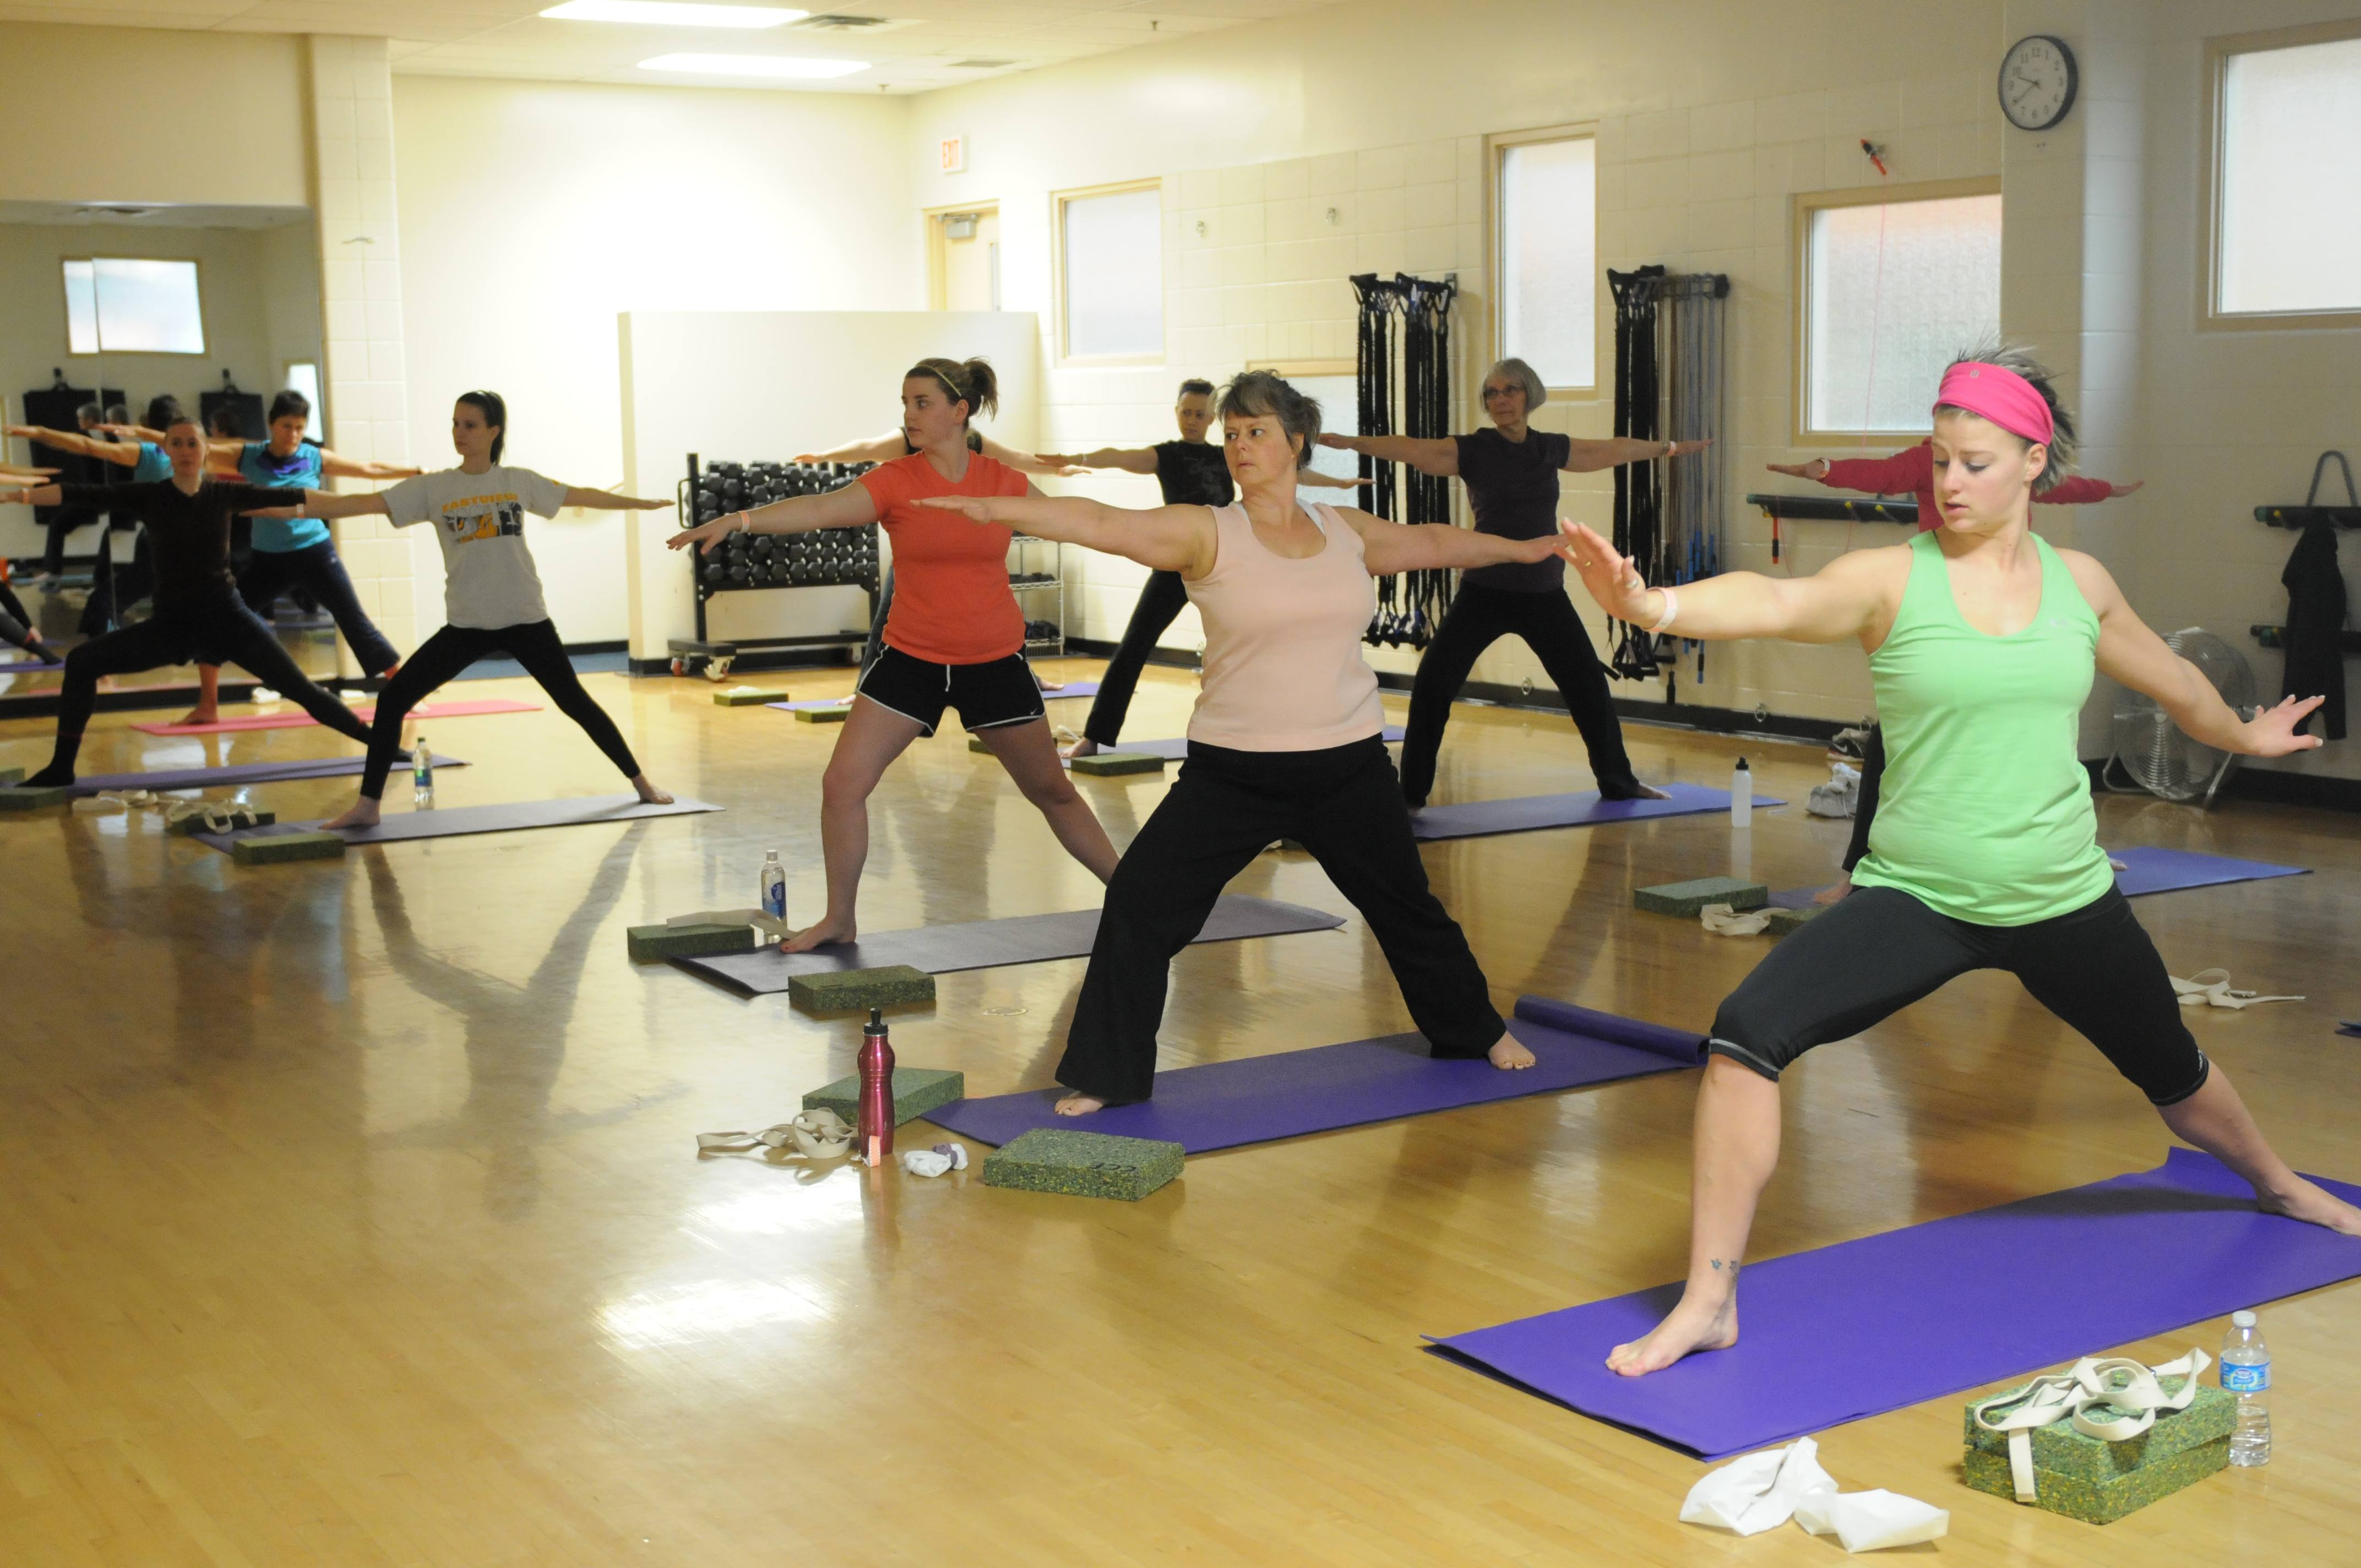 WARRIOR STANCE- Red Deerians participate in a Fusion yoga class at the Collicutt Centre recently.